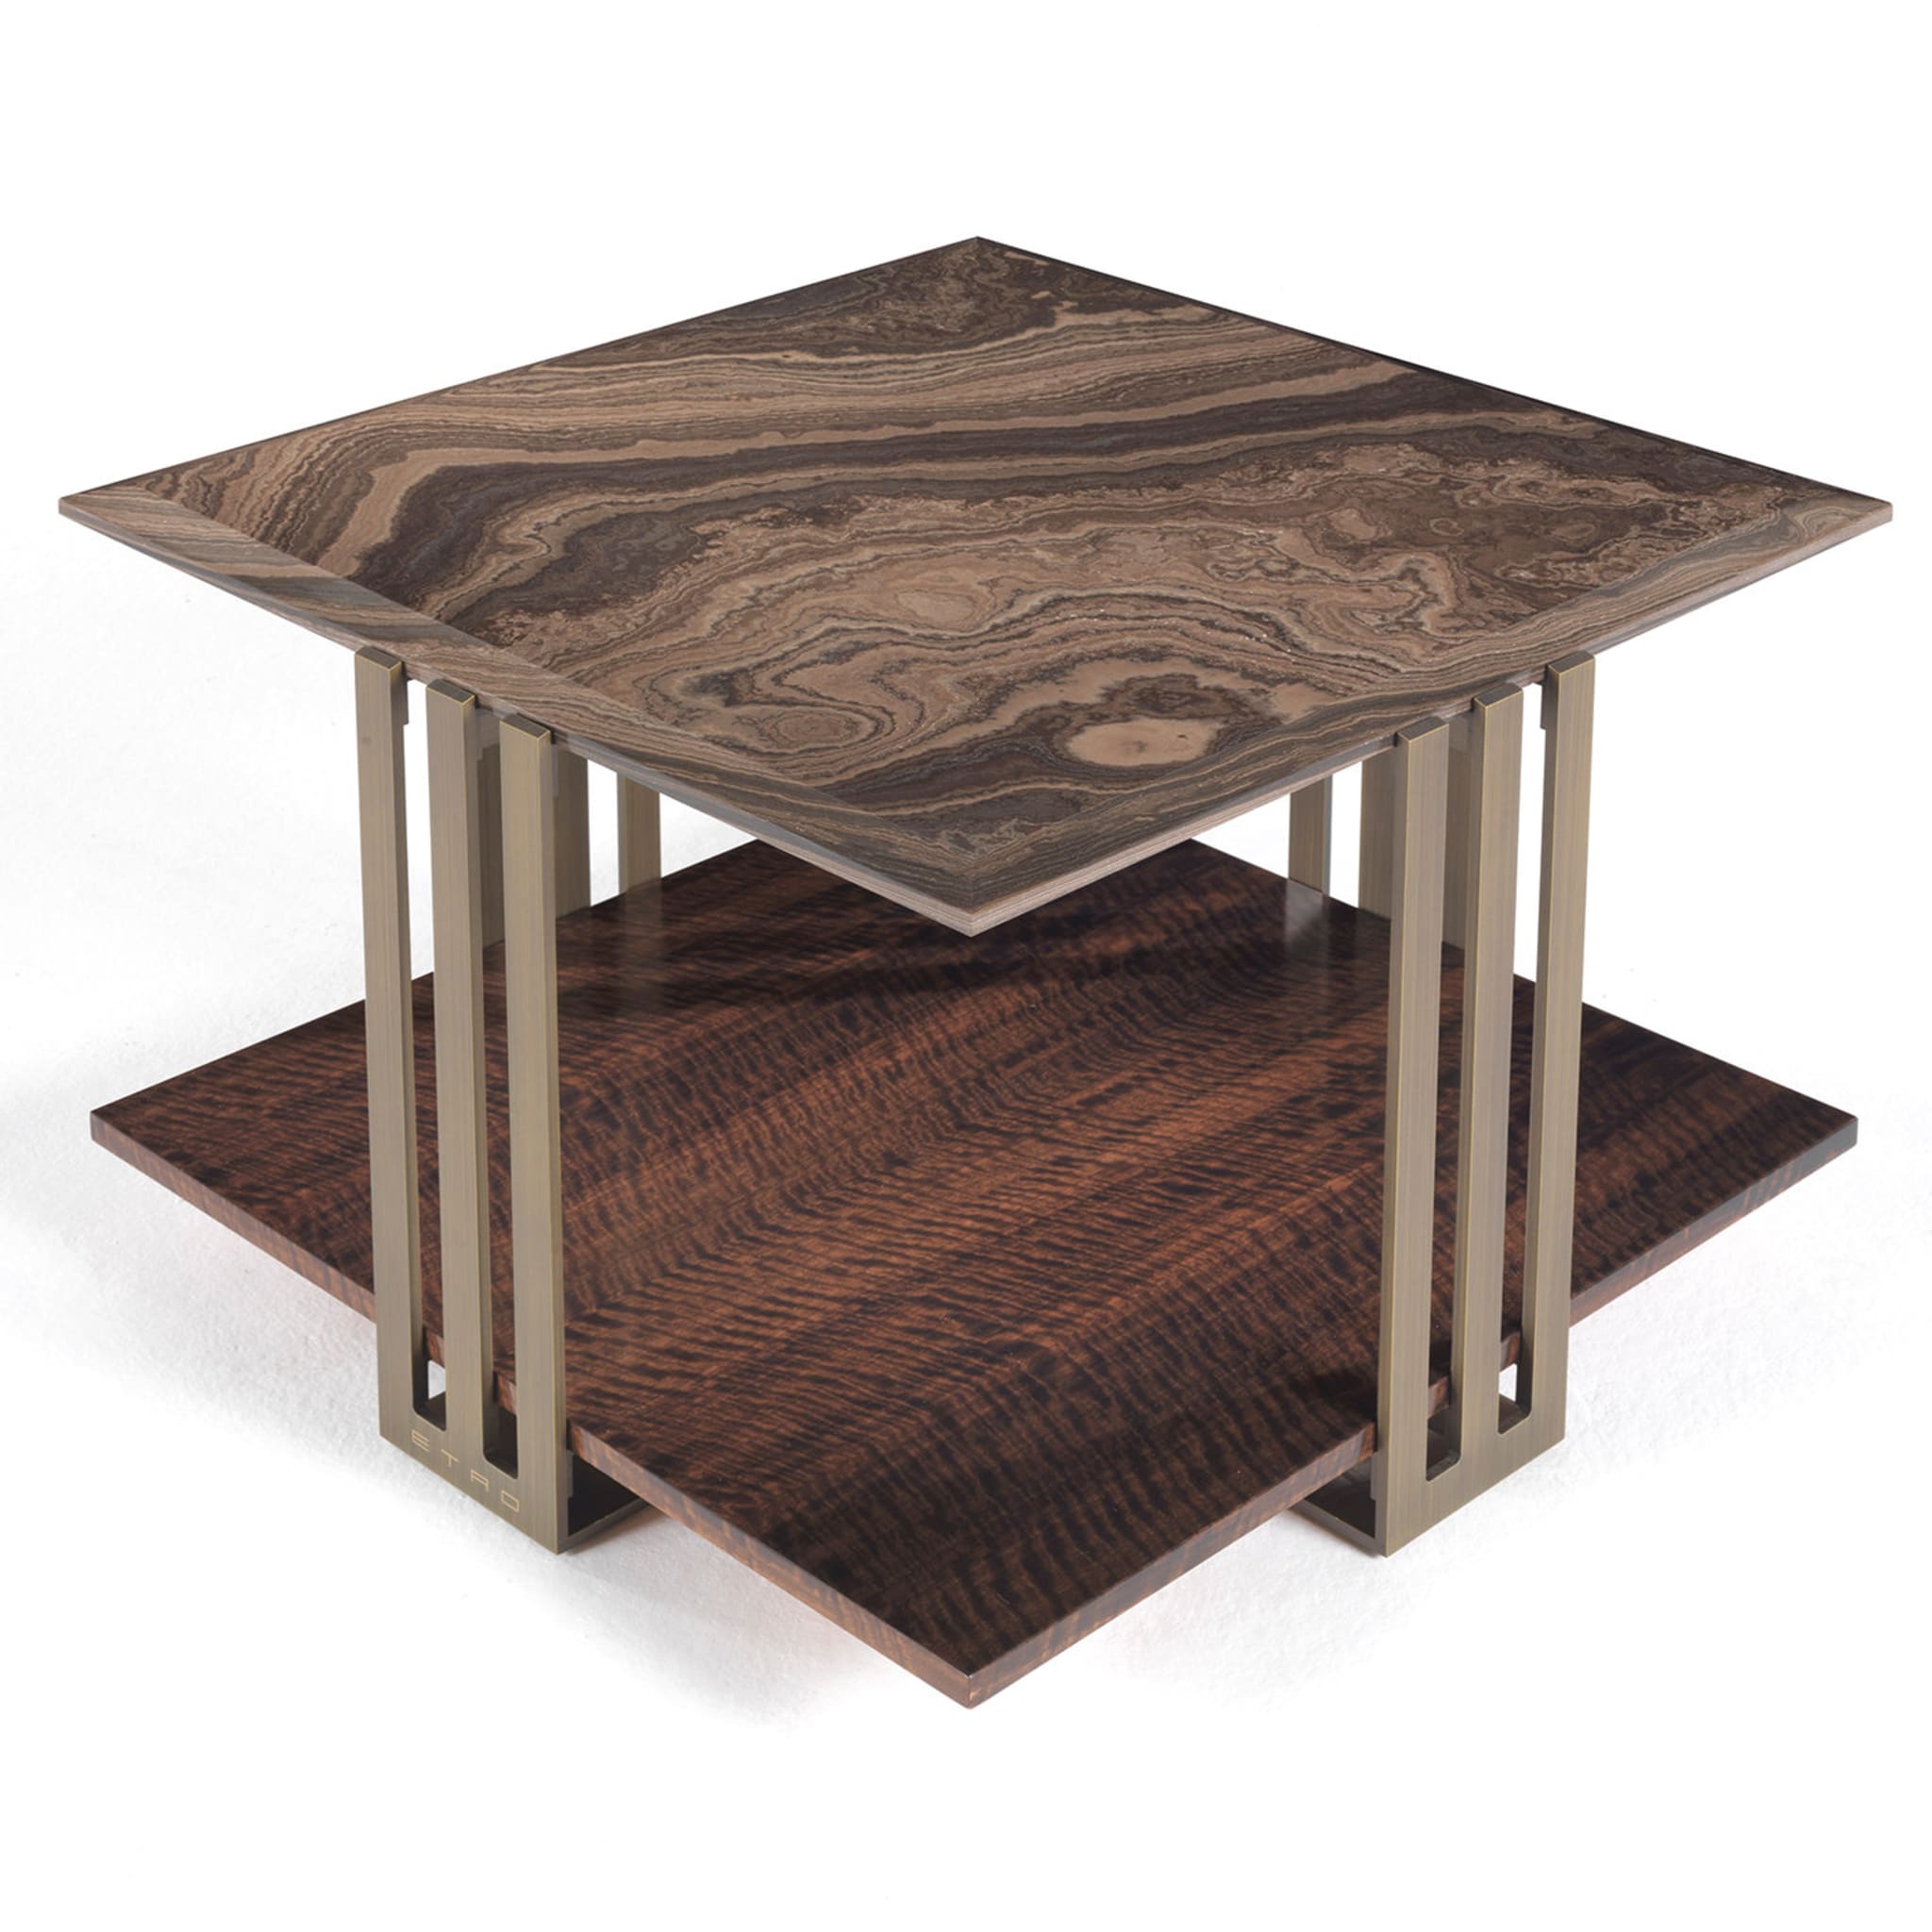 Klee Side Table - Alternative view 1